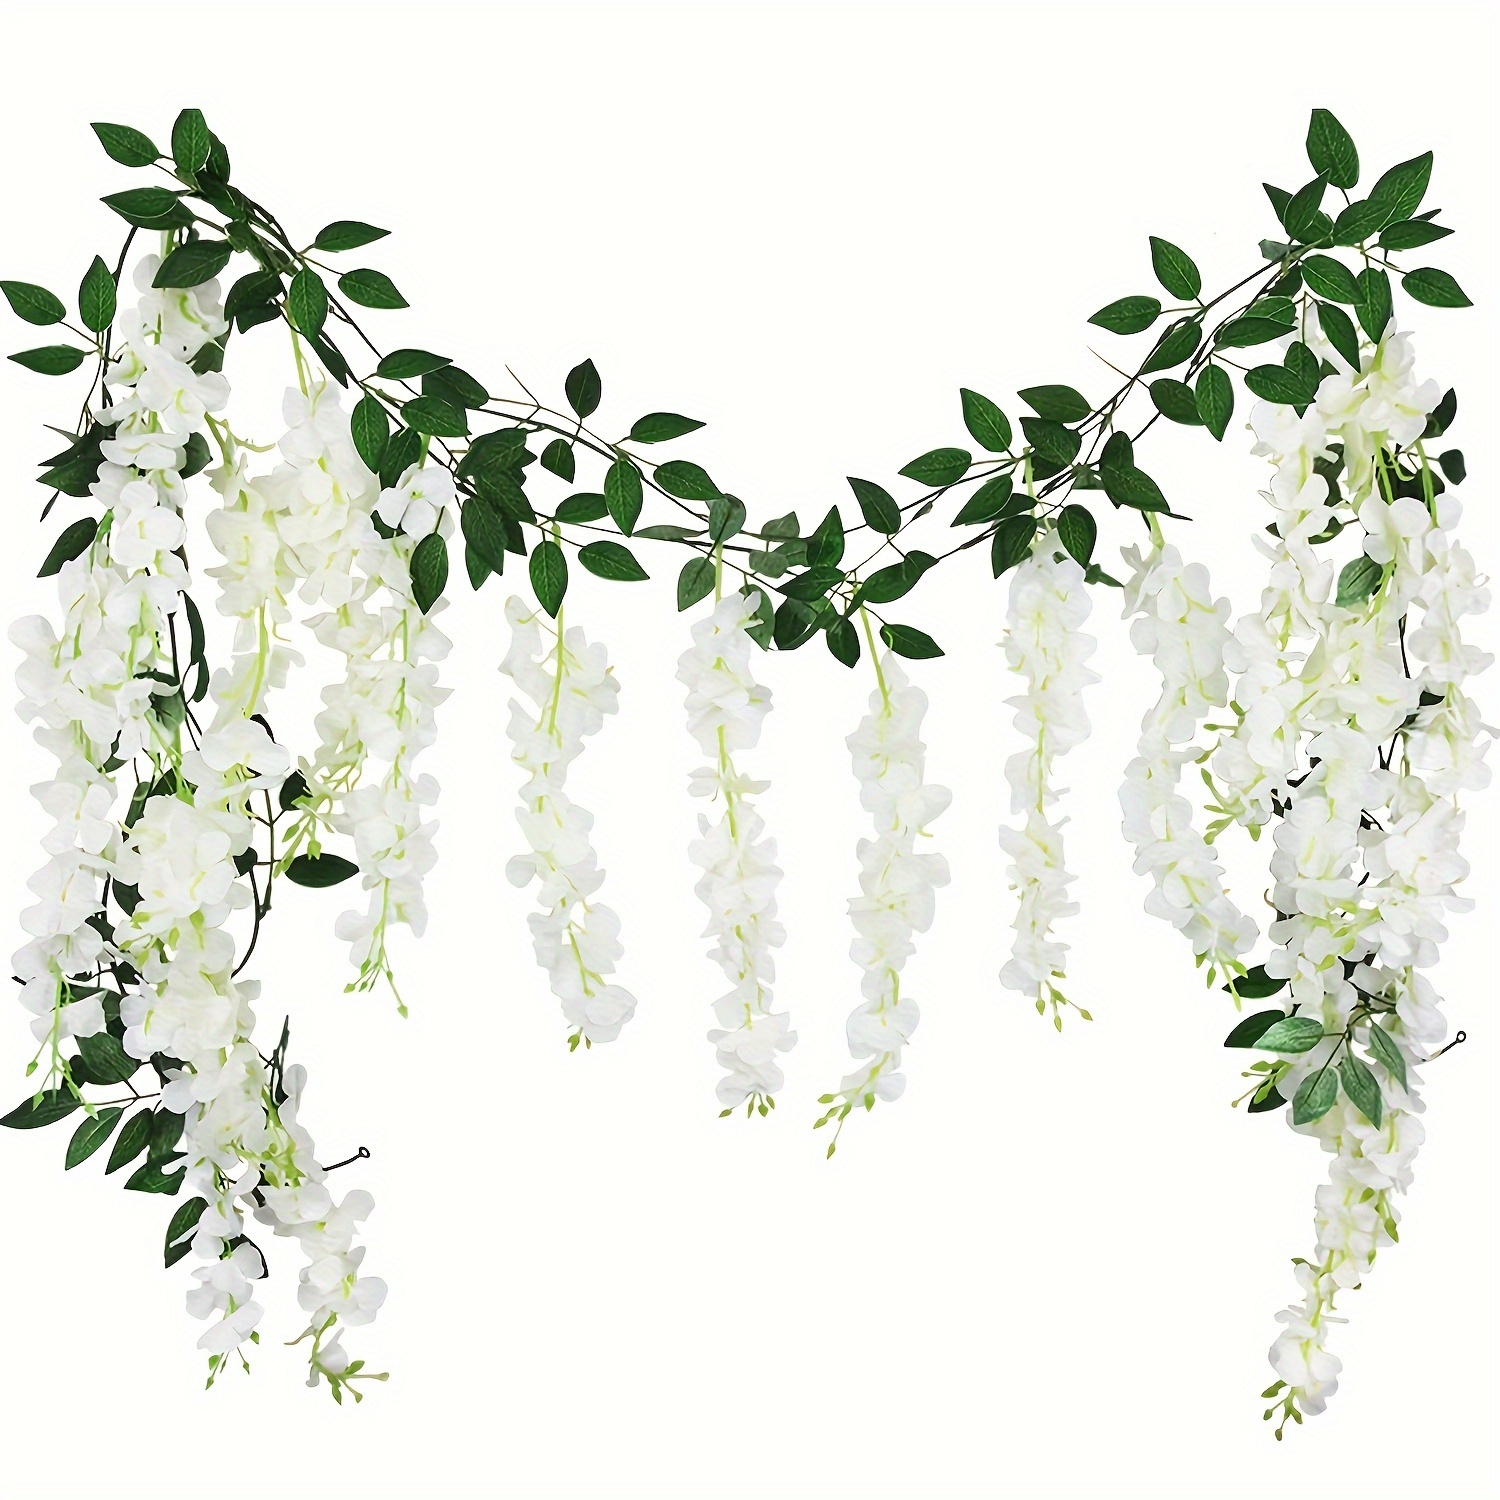 

1pc 6.2ft Wisteria Hanging Flowers, Faux Wisteria Flowers Vine Garland Wedding Arch Decoration, White Artificial Wisteria Vines Hanging Flower Vines For Party Garden Home Table Backdrop Decor